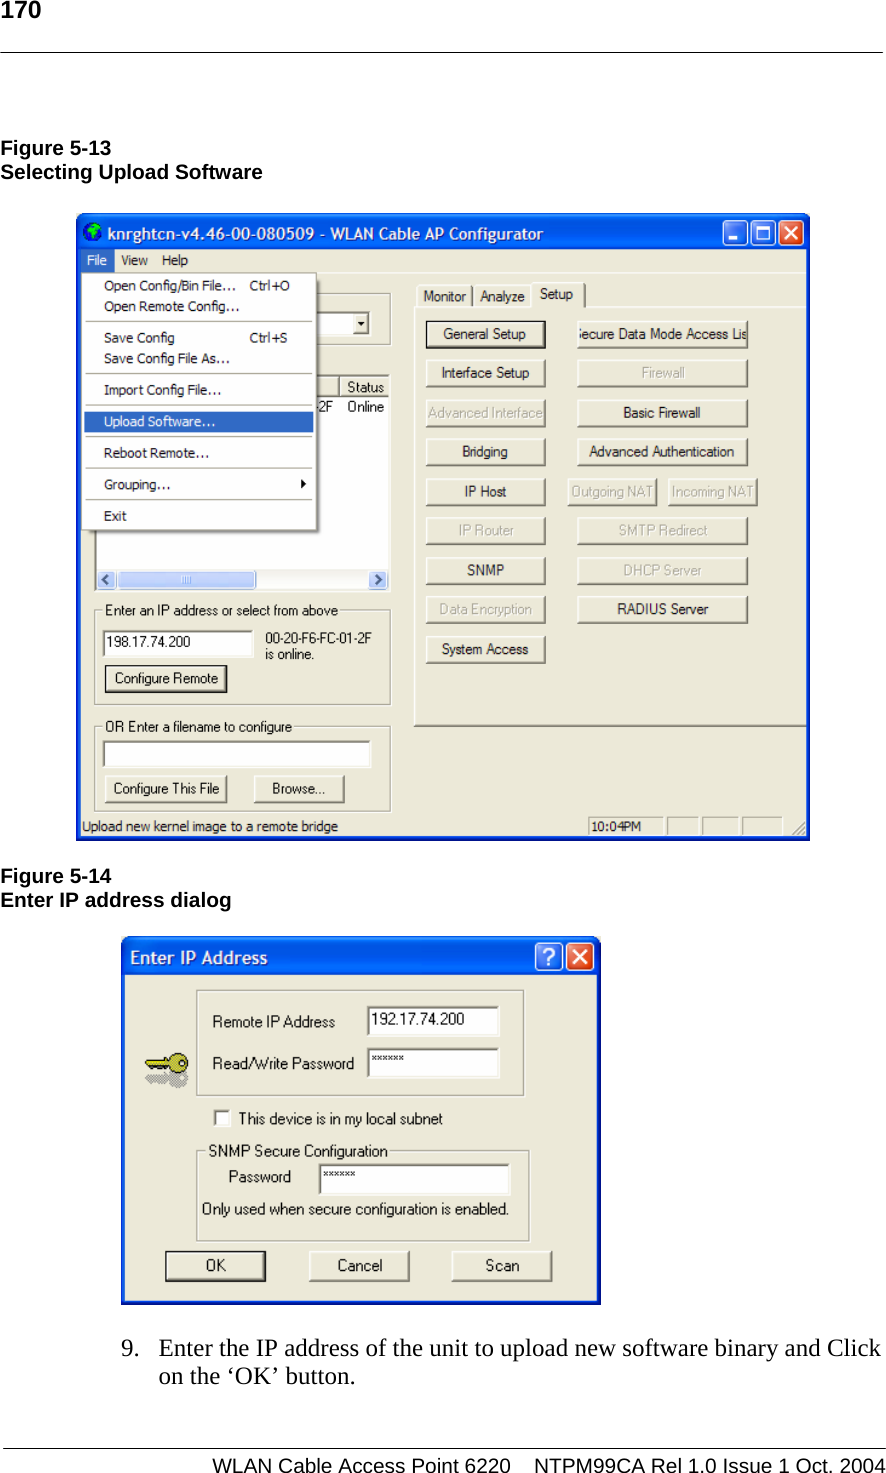   170     Figure 5-13 Selecting Upload Software     Figure 5-14 Enter IP address dialog    9. Enter the IP address of the unit to upload new software binary and Click on the ‘OK’ button.   WLAN Cable Access Point 6220    NTPM99CA Rel 1.0 Issue 1 Oct. 2004